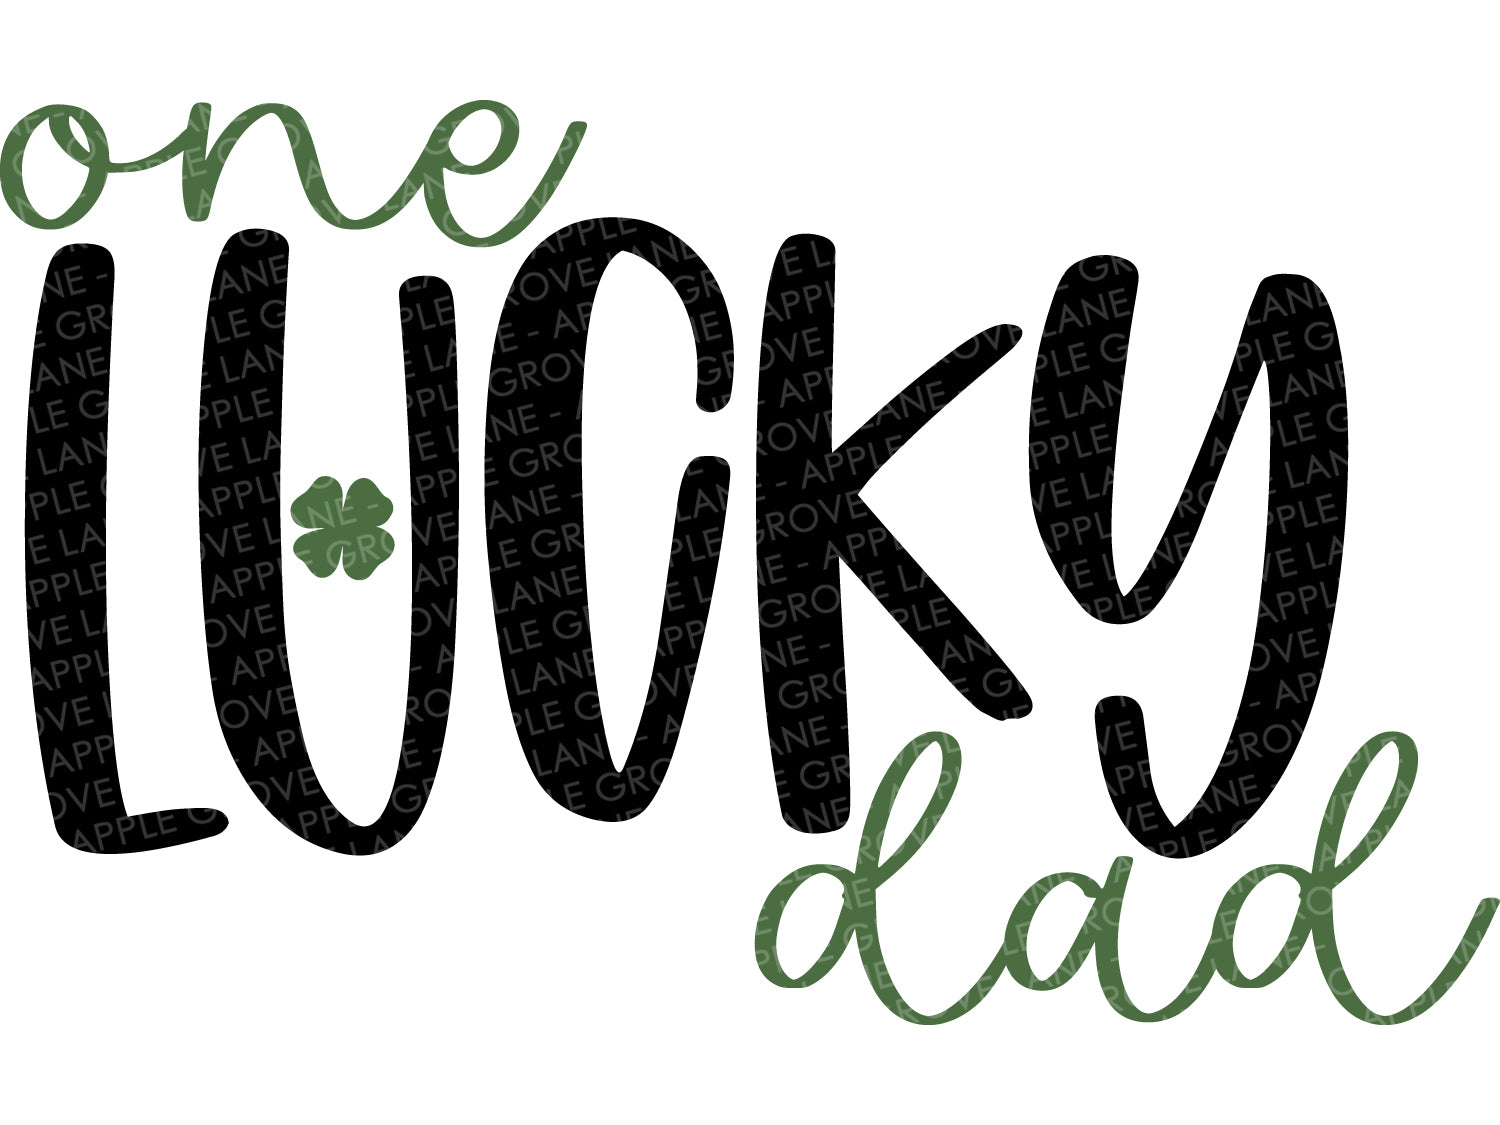 Download Lucky Svg Cut File Silhouette Eps Shamrock Svg Clip Art Irish Svg St Patrick S Day Svg Dxf Cricut St Patrick S Shirt Clover Svg Kits How To Craft Supplies Tools 330 Co Il